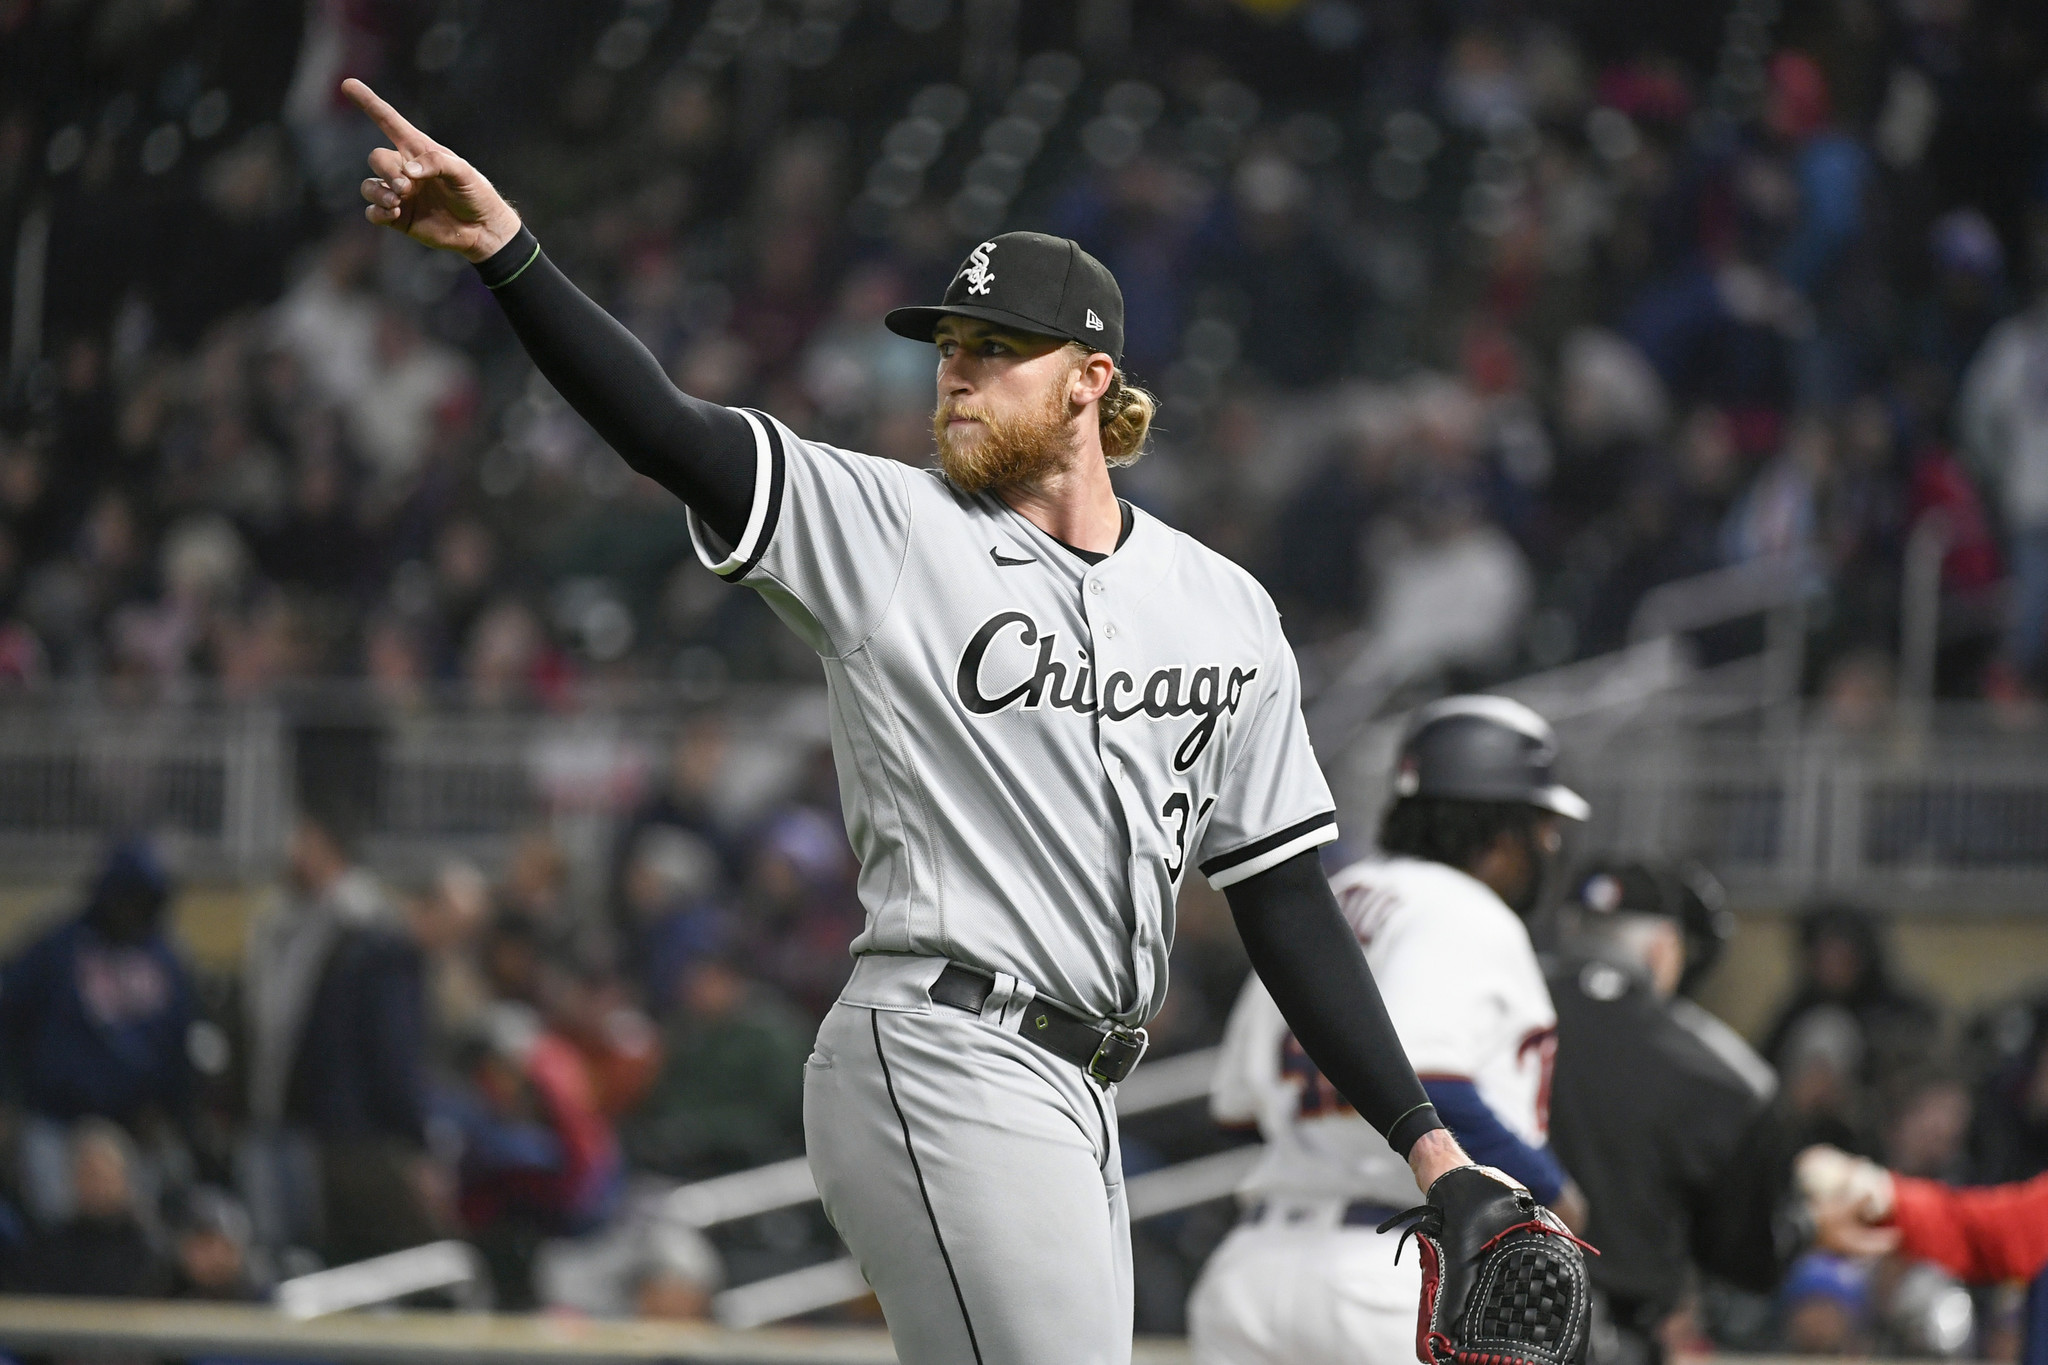 Candor about anxiety is therapeutic for White Sox' Kopech